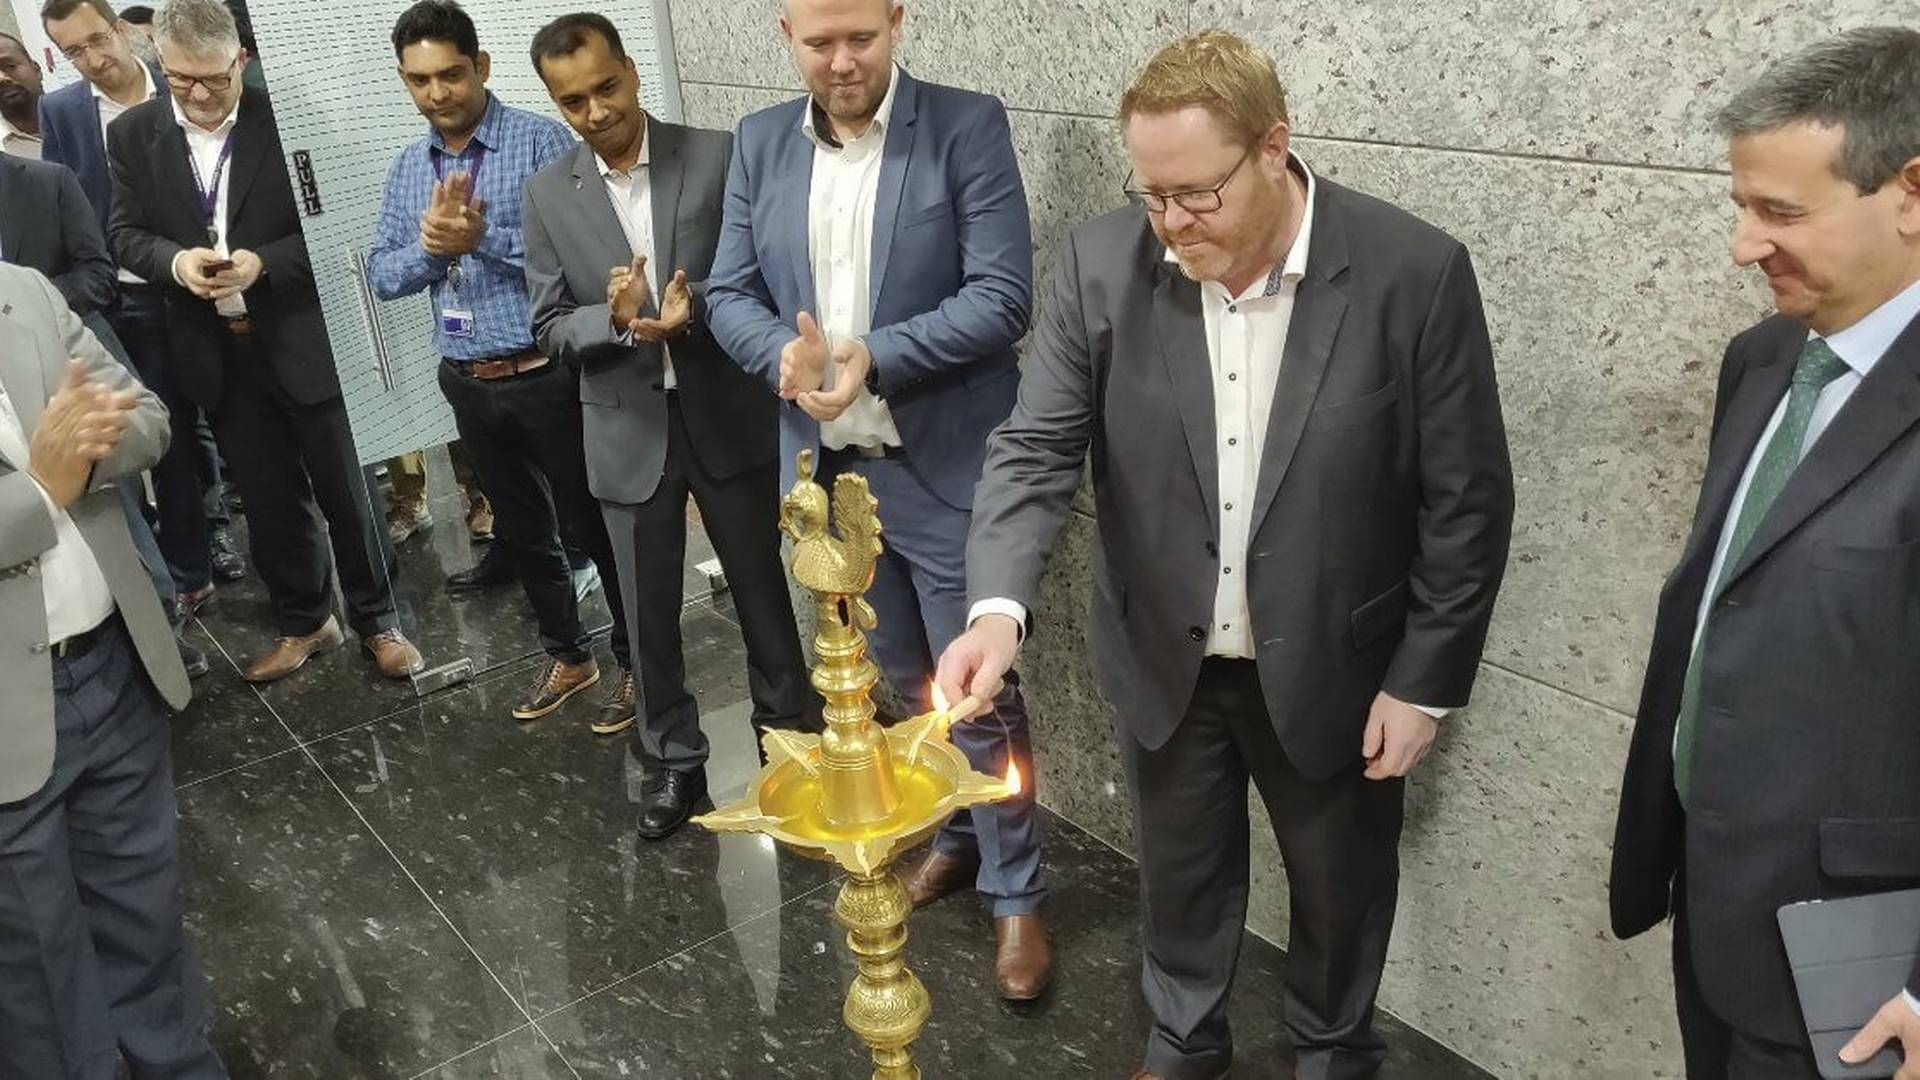 In 2018, Siemens Gamesa's Chief Technology Officer Morten Pilgaard Rasmussen attended the inauguration of a new O&M center in Chennai. Now, however, the winds appear to have changed. | Photo: Siemens Gamesa